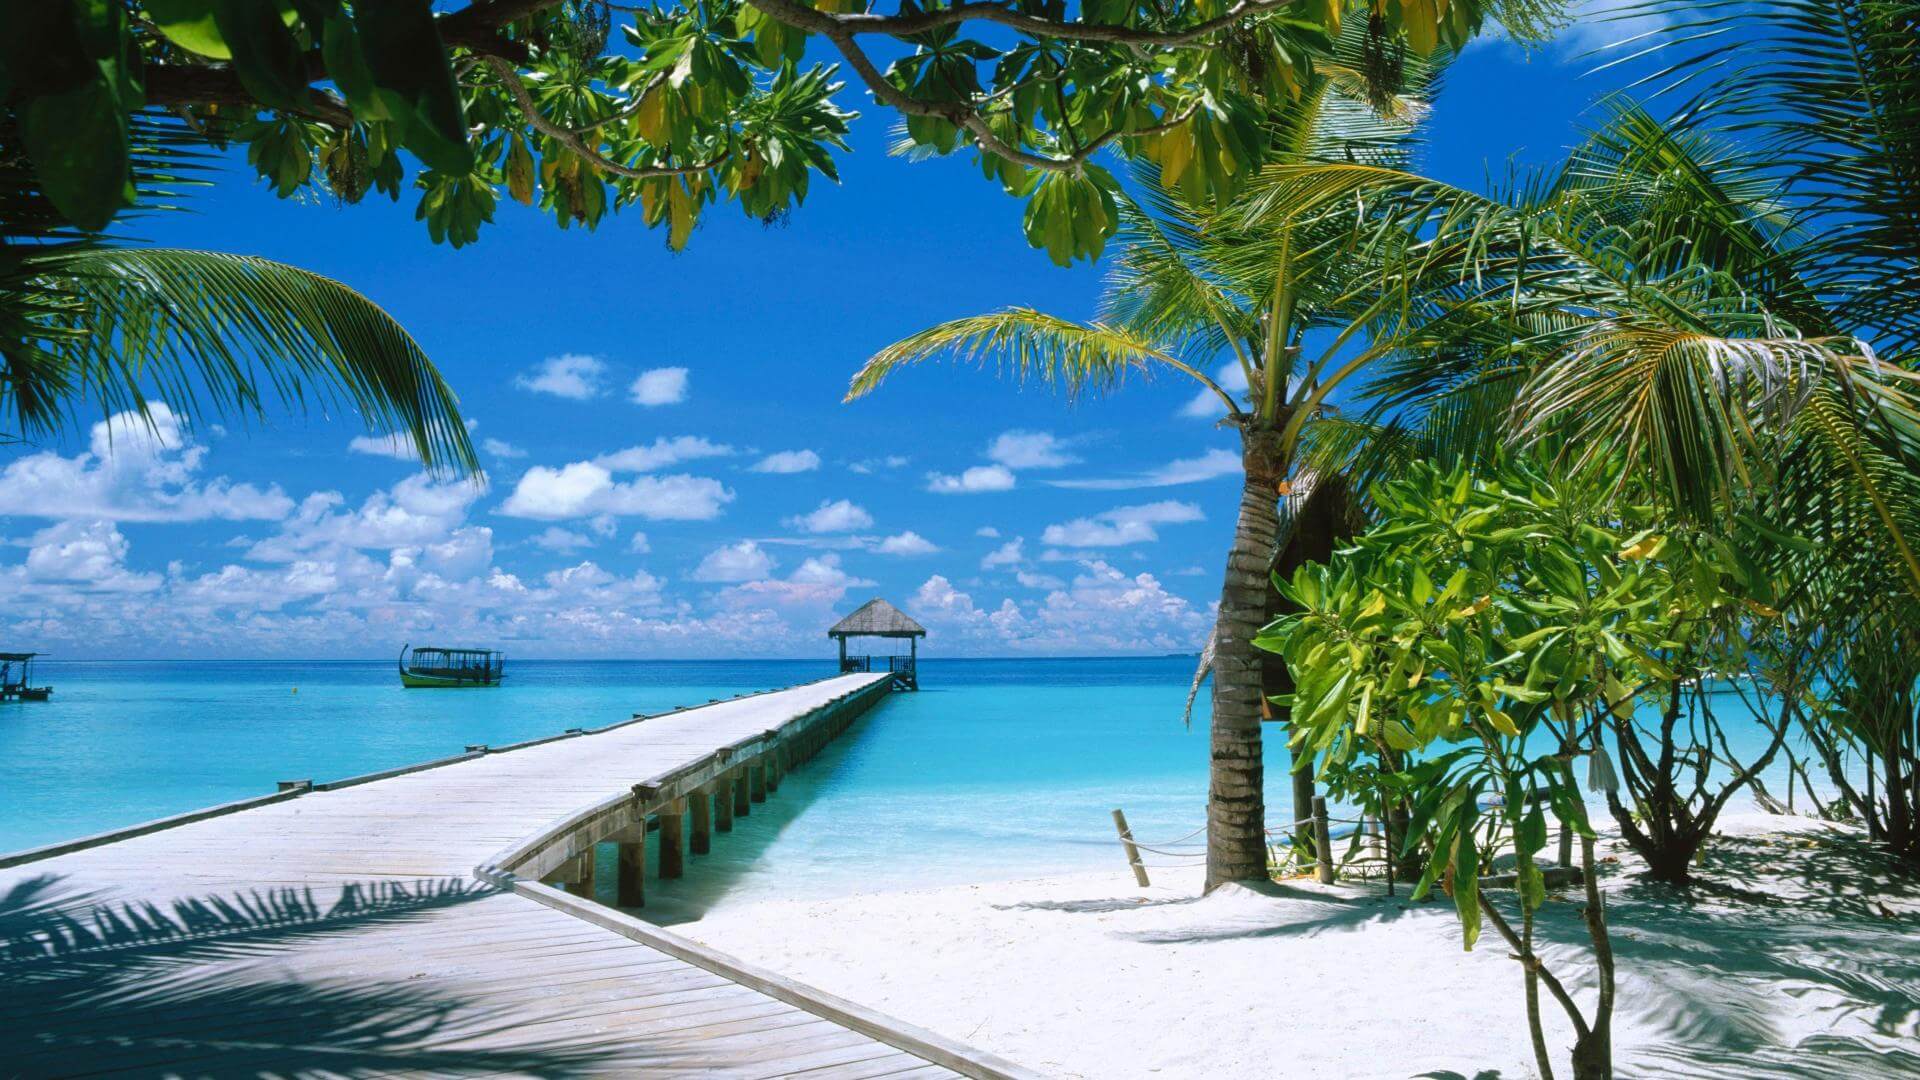 Winter Maldives 3 Star Holiday Travel & Tour Package